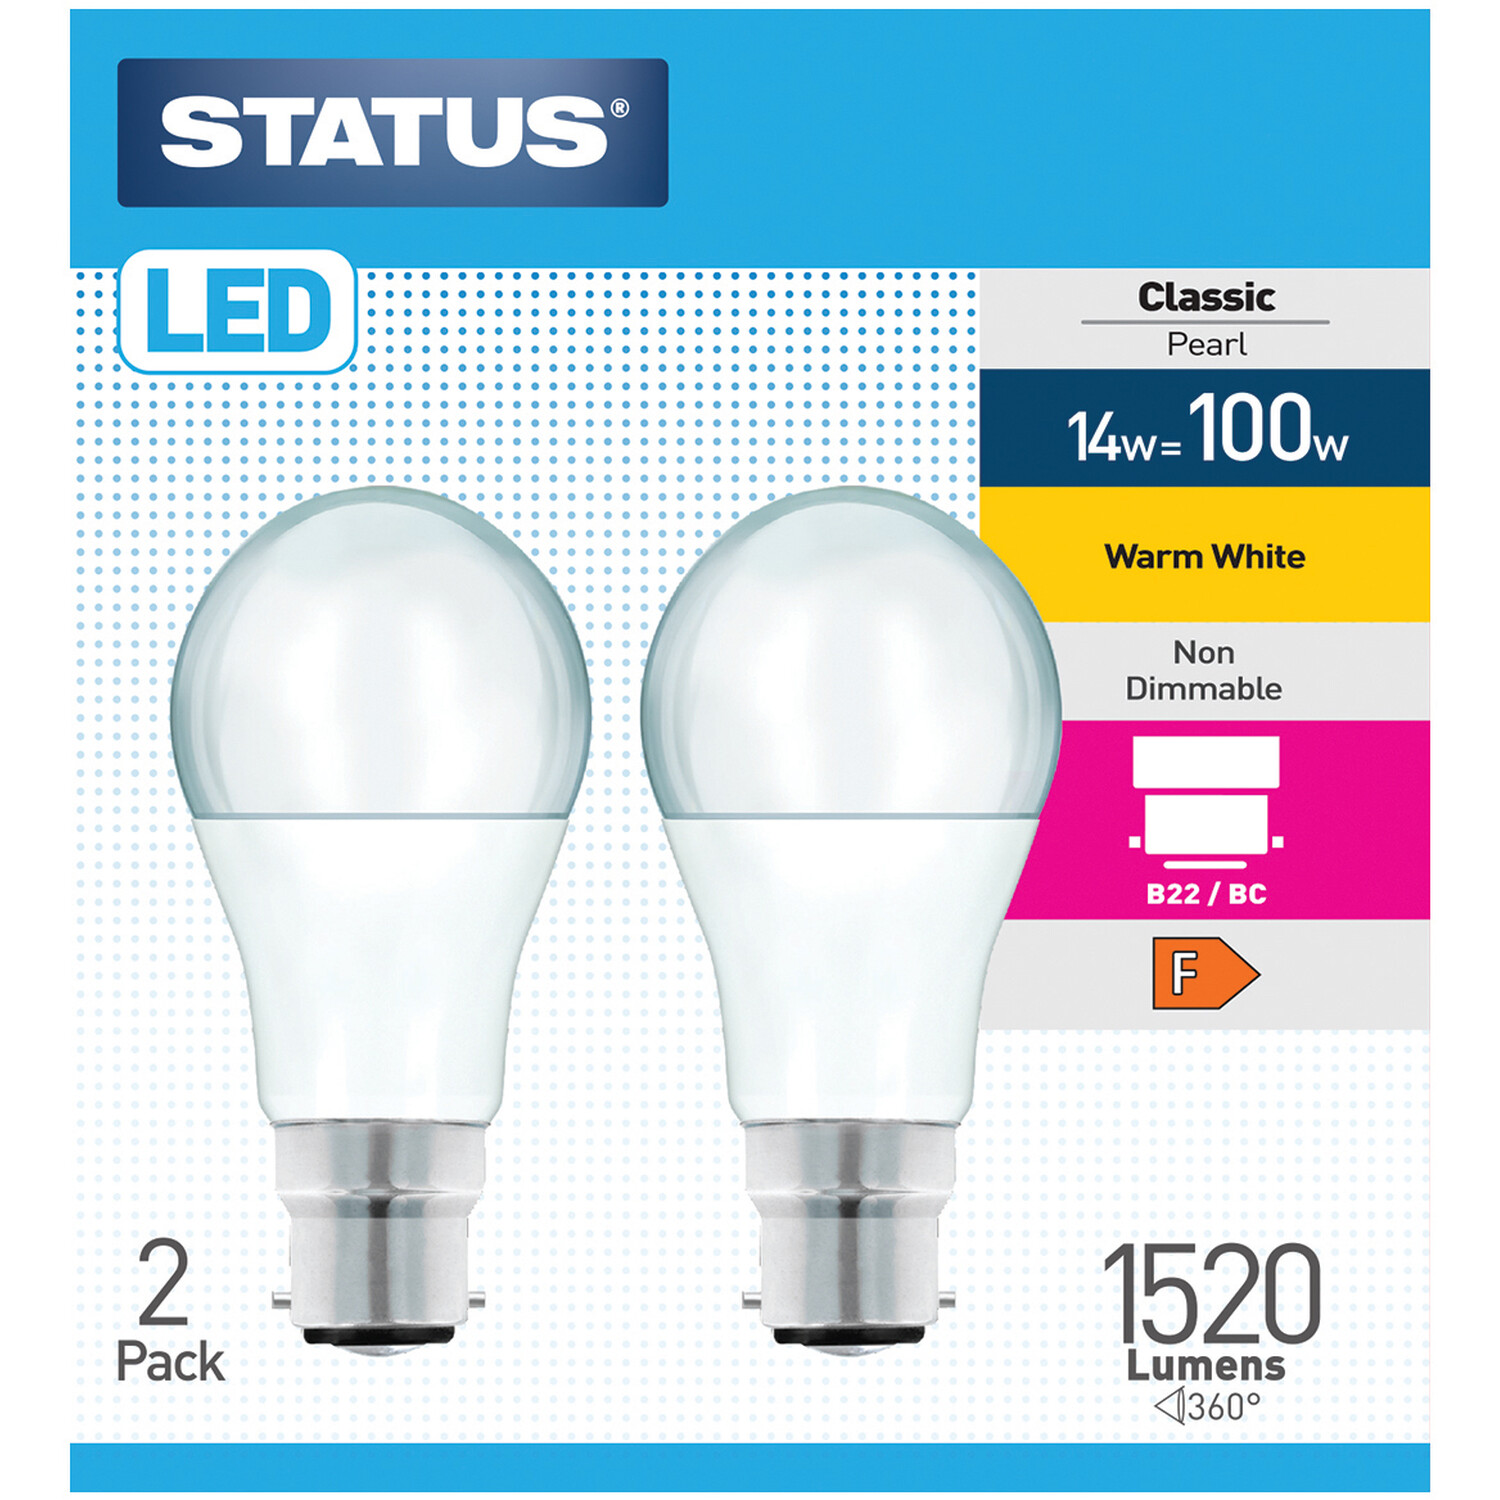 Pack of 2 Status LED 14W Non-Dimmable Classic Pearl Lightbulbs - Bayonet Cap / BC Image 1